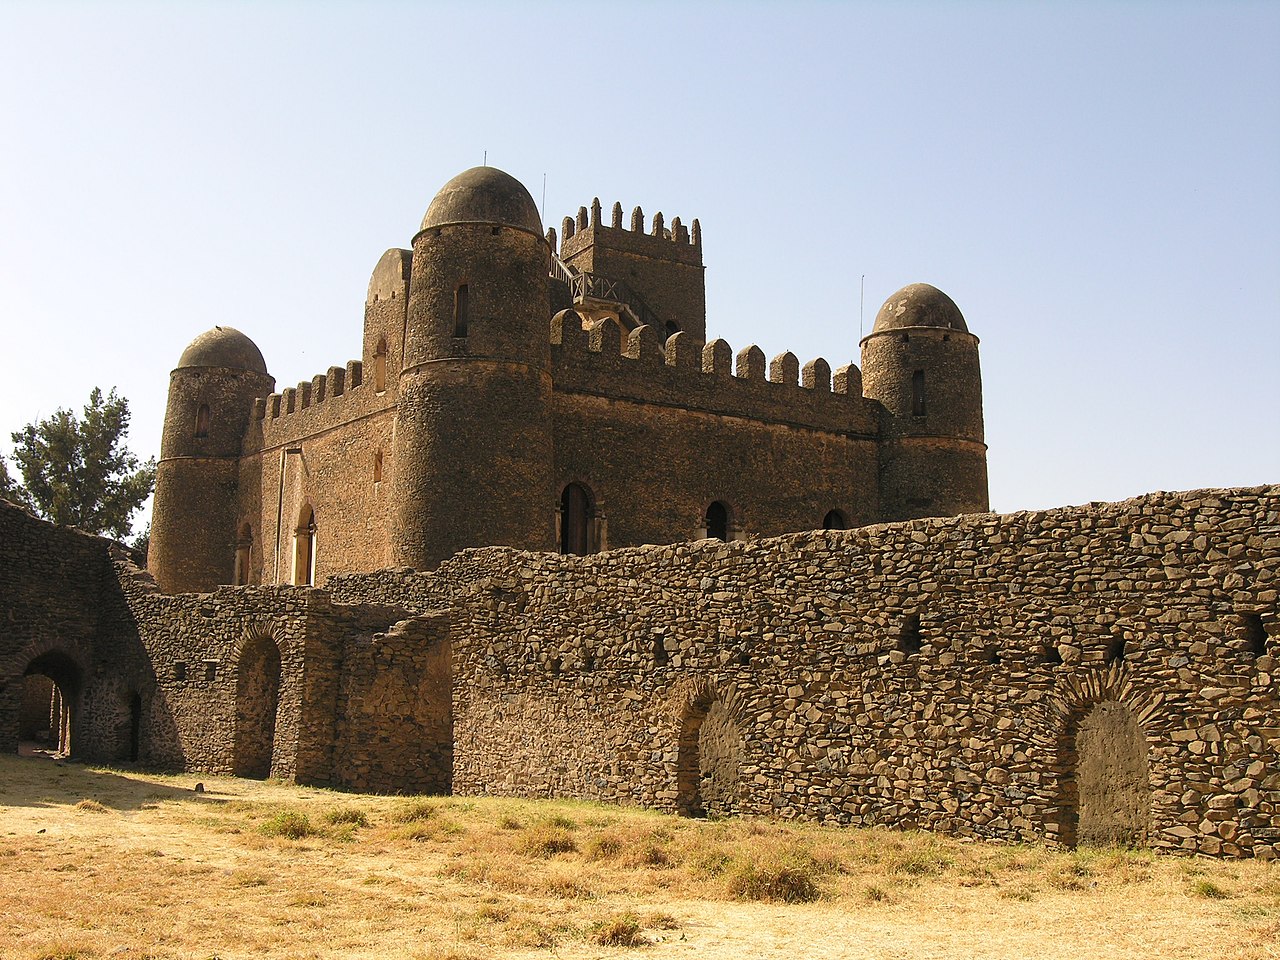 <p>Fasil Ghebbi was commissioned in 1636, when Emperor Fasilides made Gondar the new capital of his empire. </p>  <p>Before this, Ethiopian emperors lived like nomads, taking shelter and food from locals that they stayed with. </p>  <p>The construction of Fasil Ghebbi marked a change to a more sedentary lifestyle for Ethiopian rulers.</p>